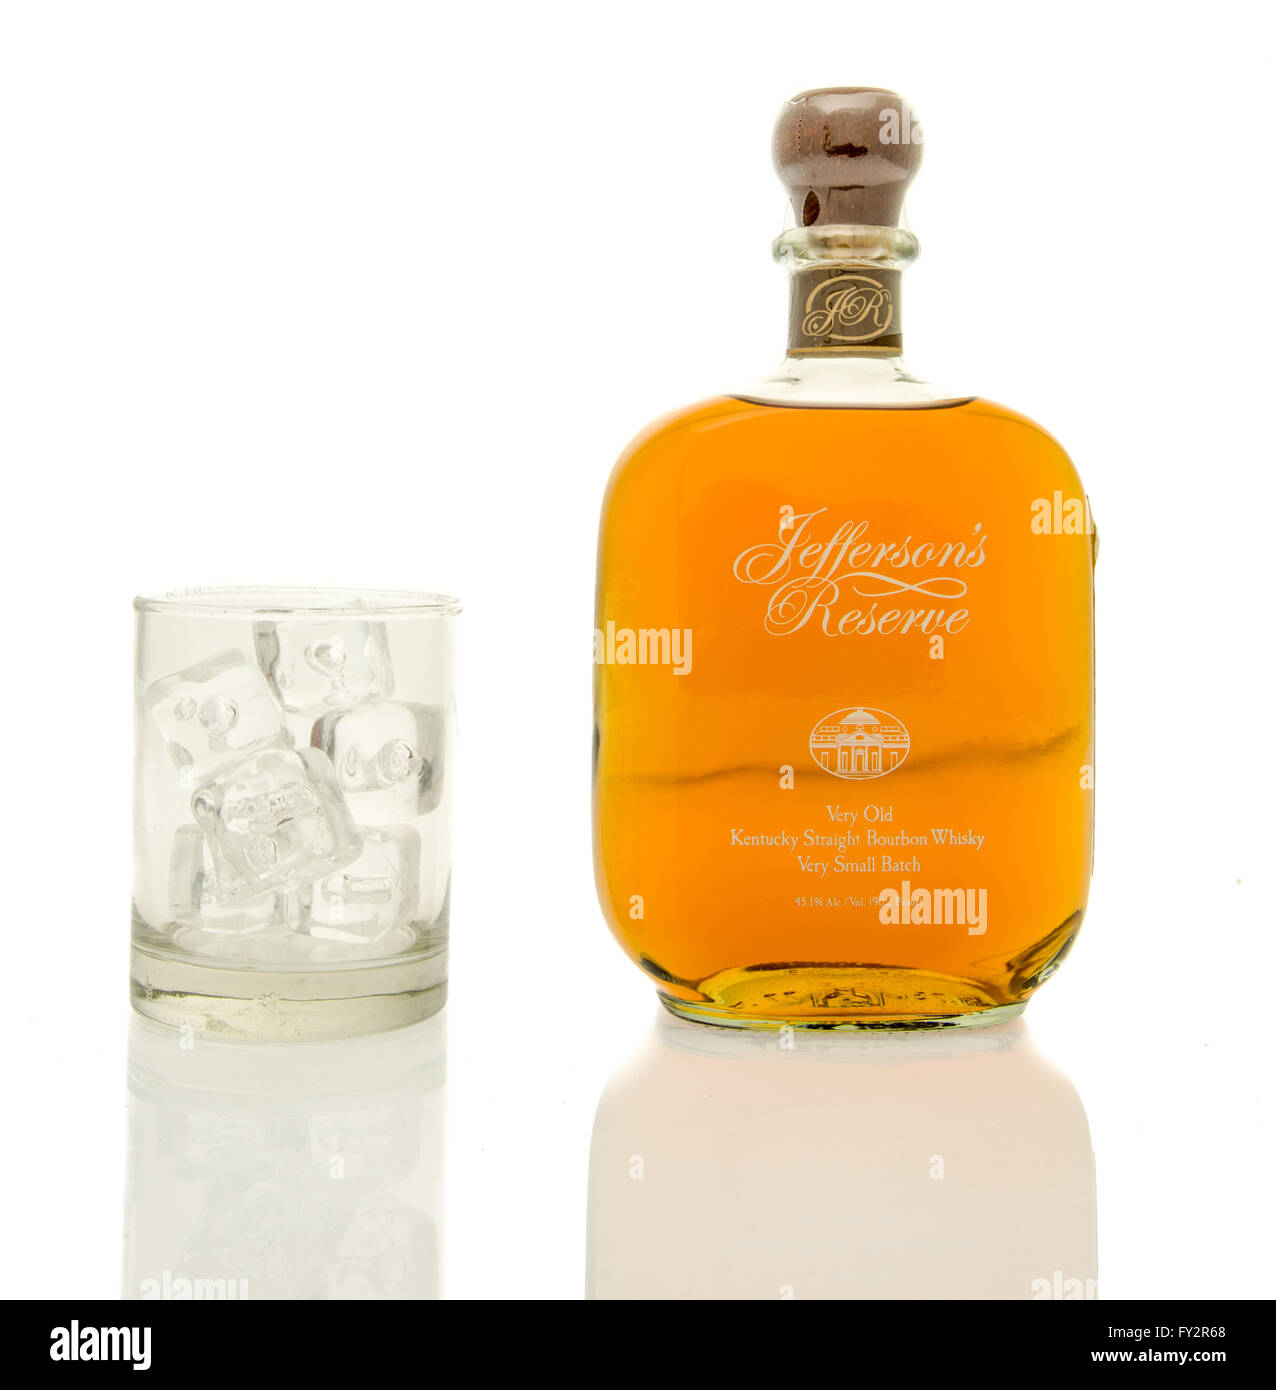 Winneconne, WI - 19 March 2016:  A bottle of Jefferson's reserve bourbon whisky with a glass of ice. Stock Photo